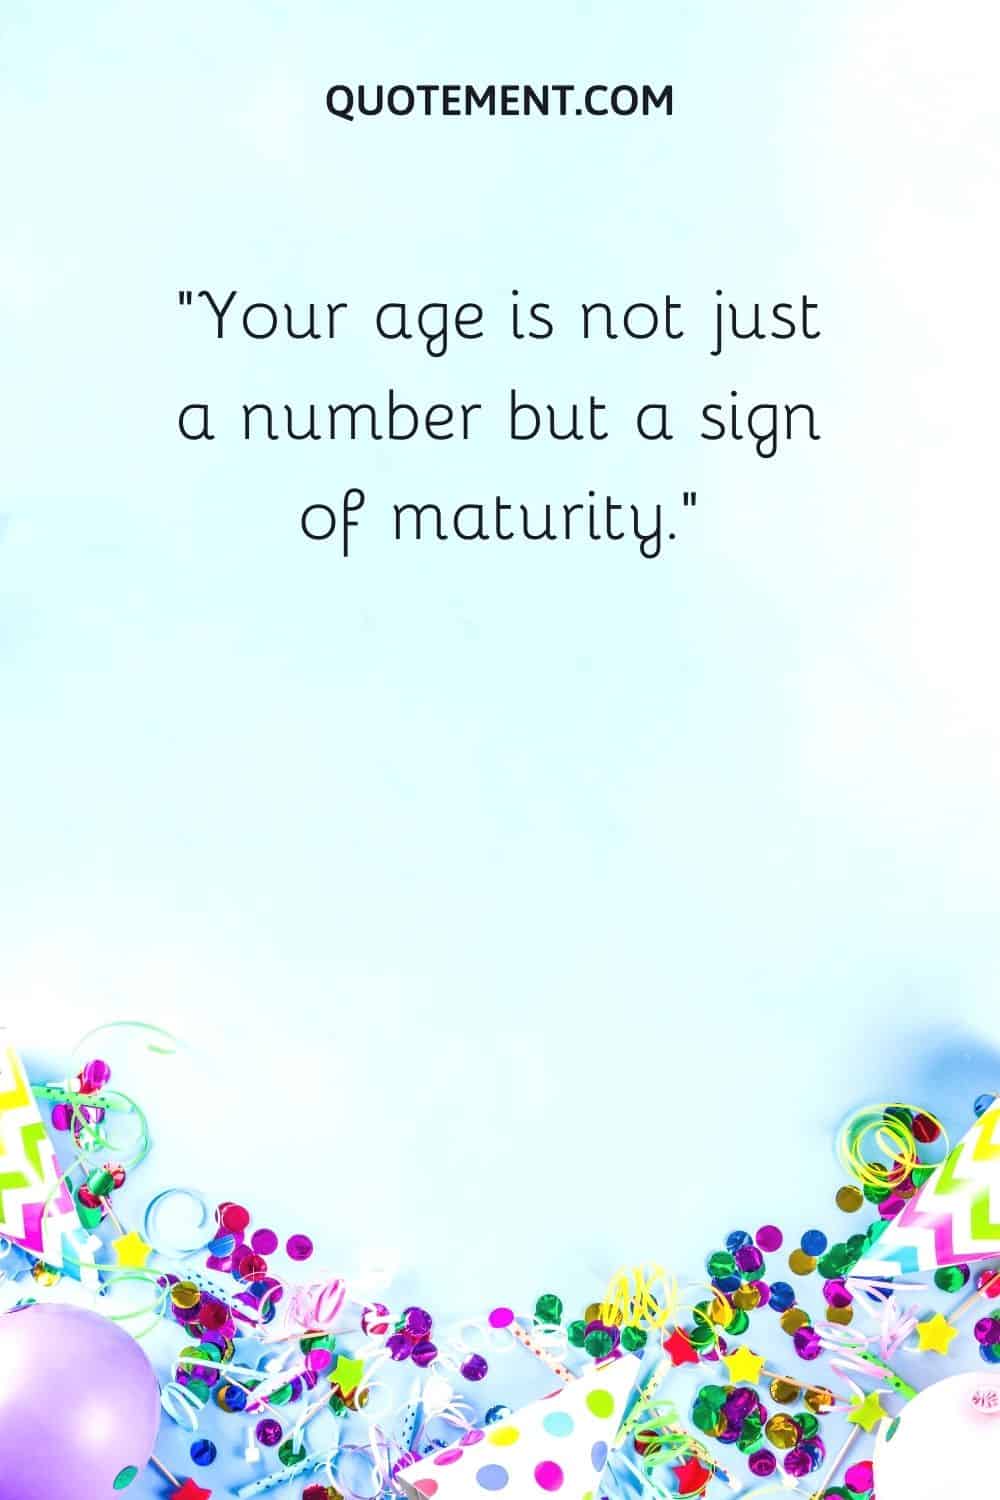 Your age is not just a number but a sign of maturity